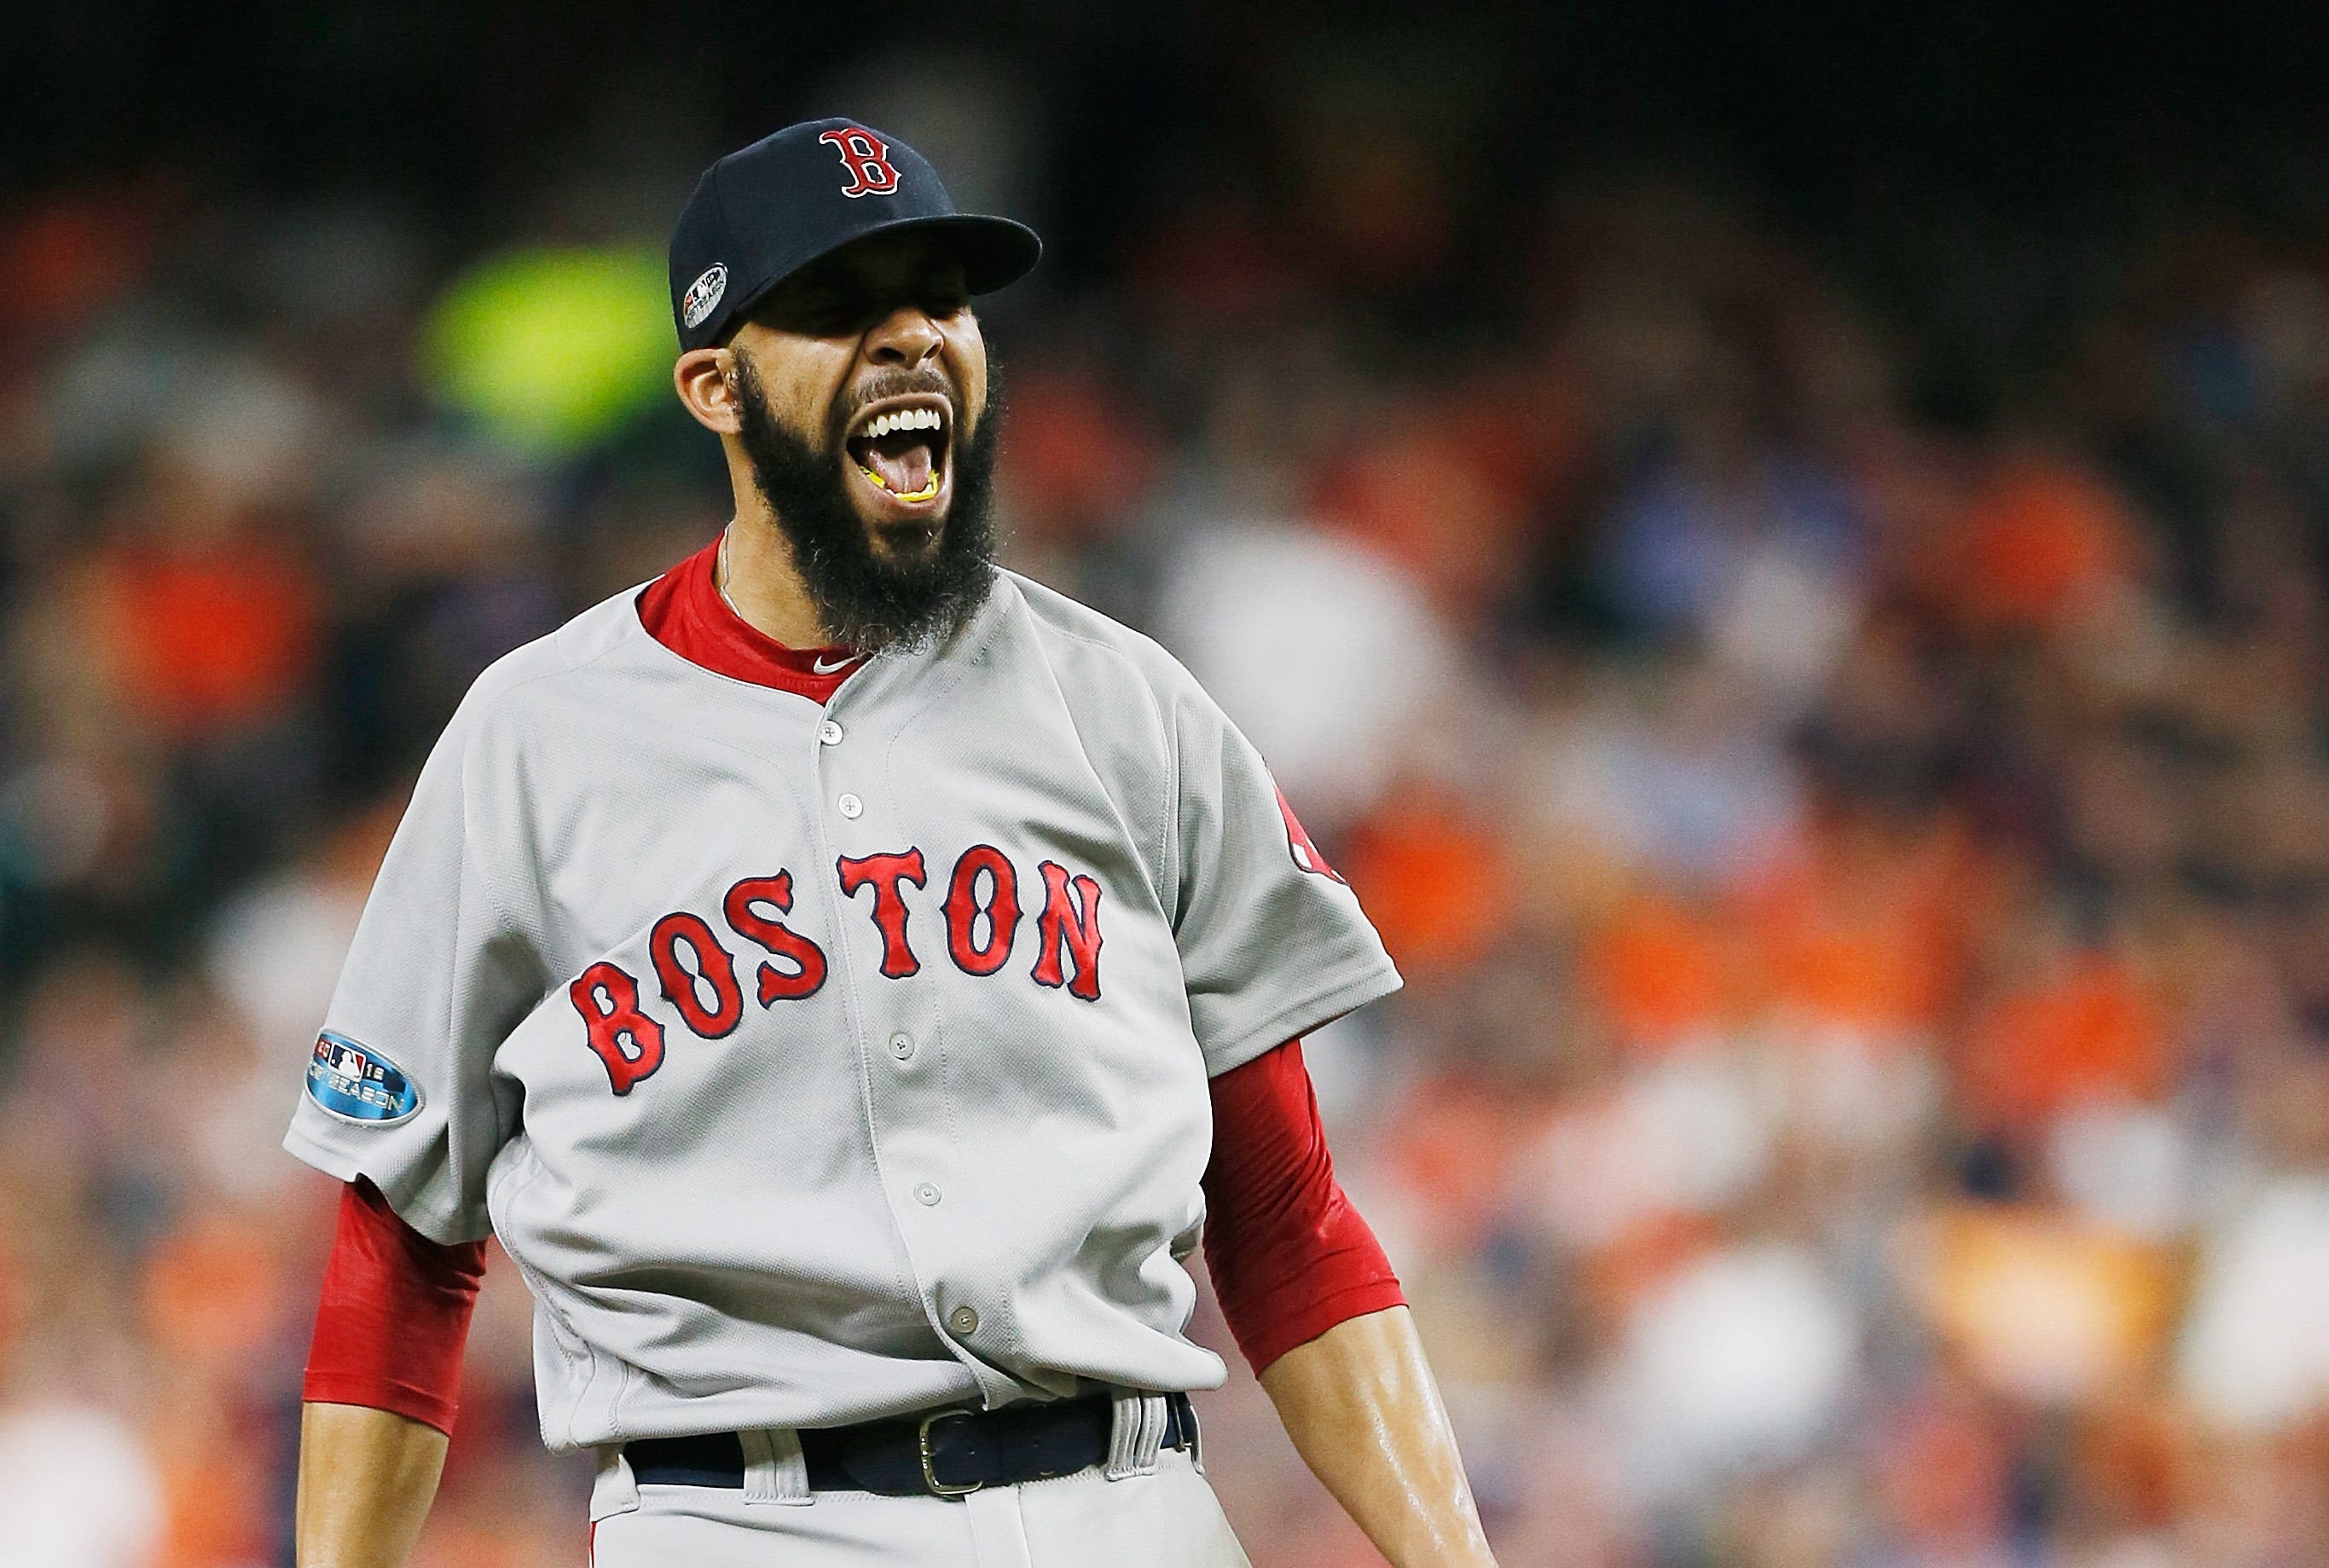 Red Sox starter David Price reacts after striking out Astros' Jose Altuve to end the sixth inning on Thursday.